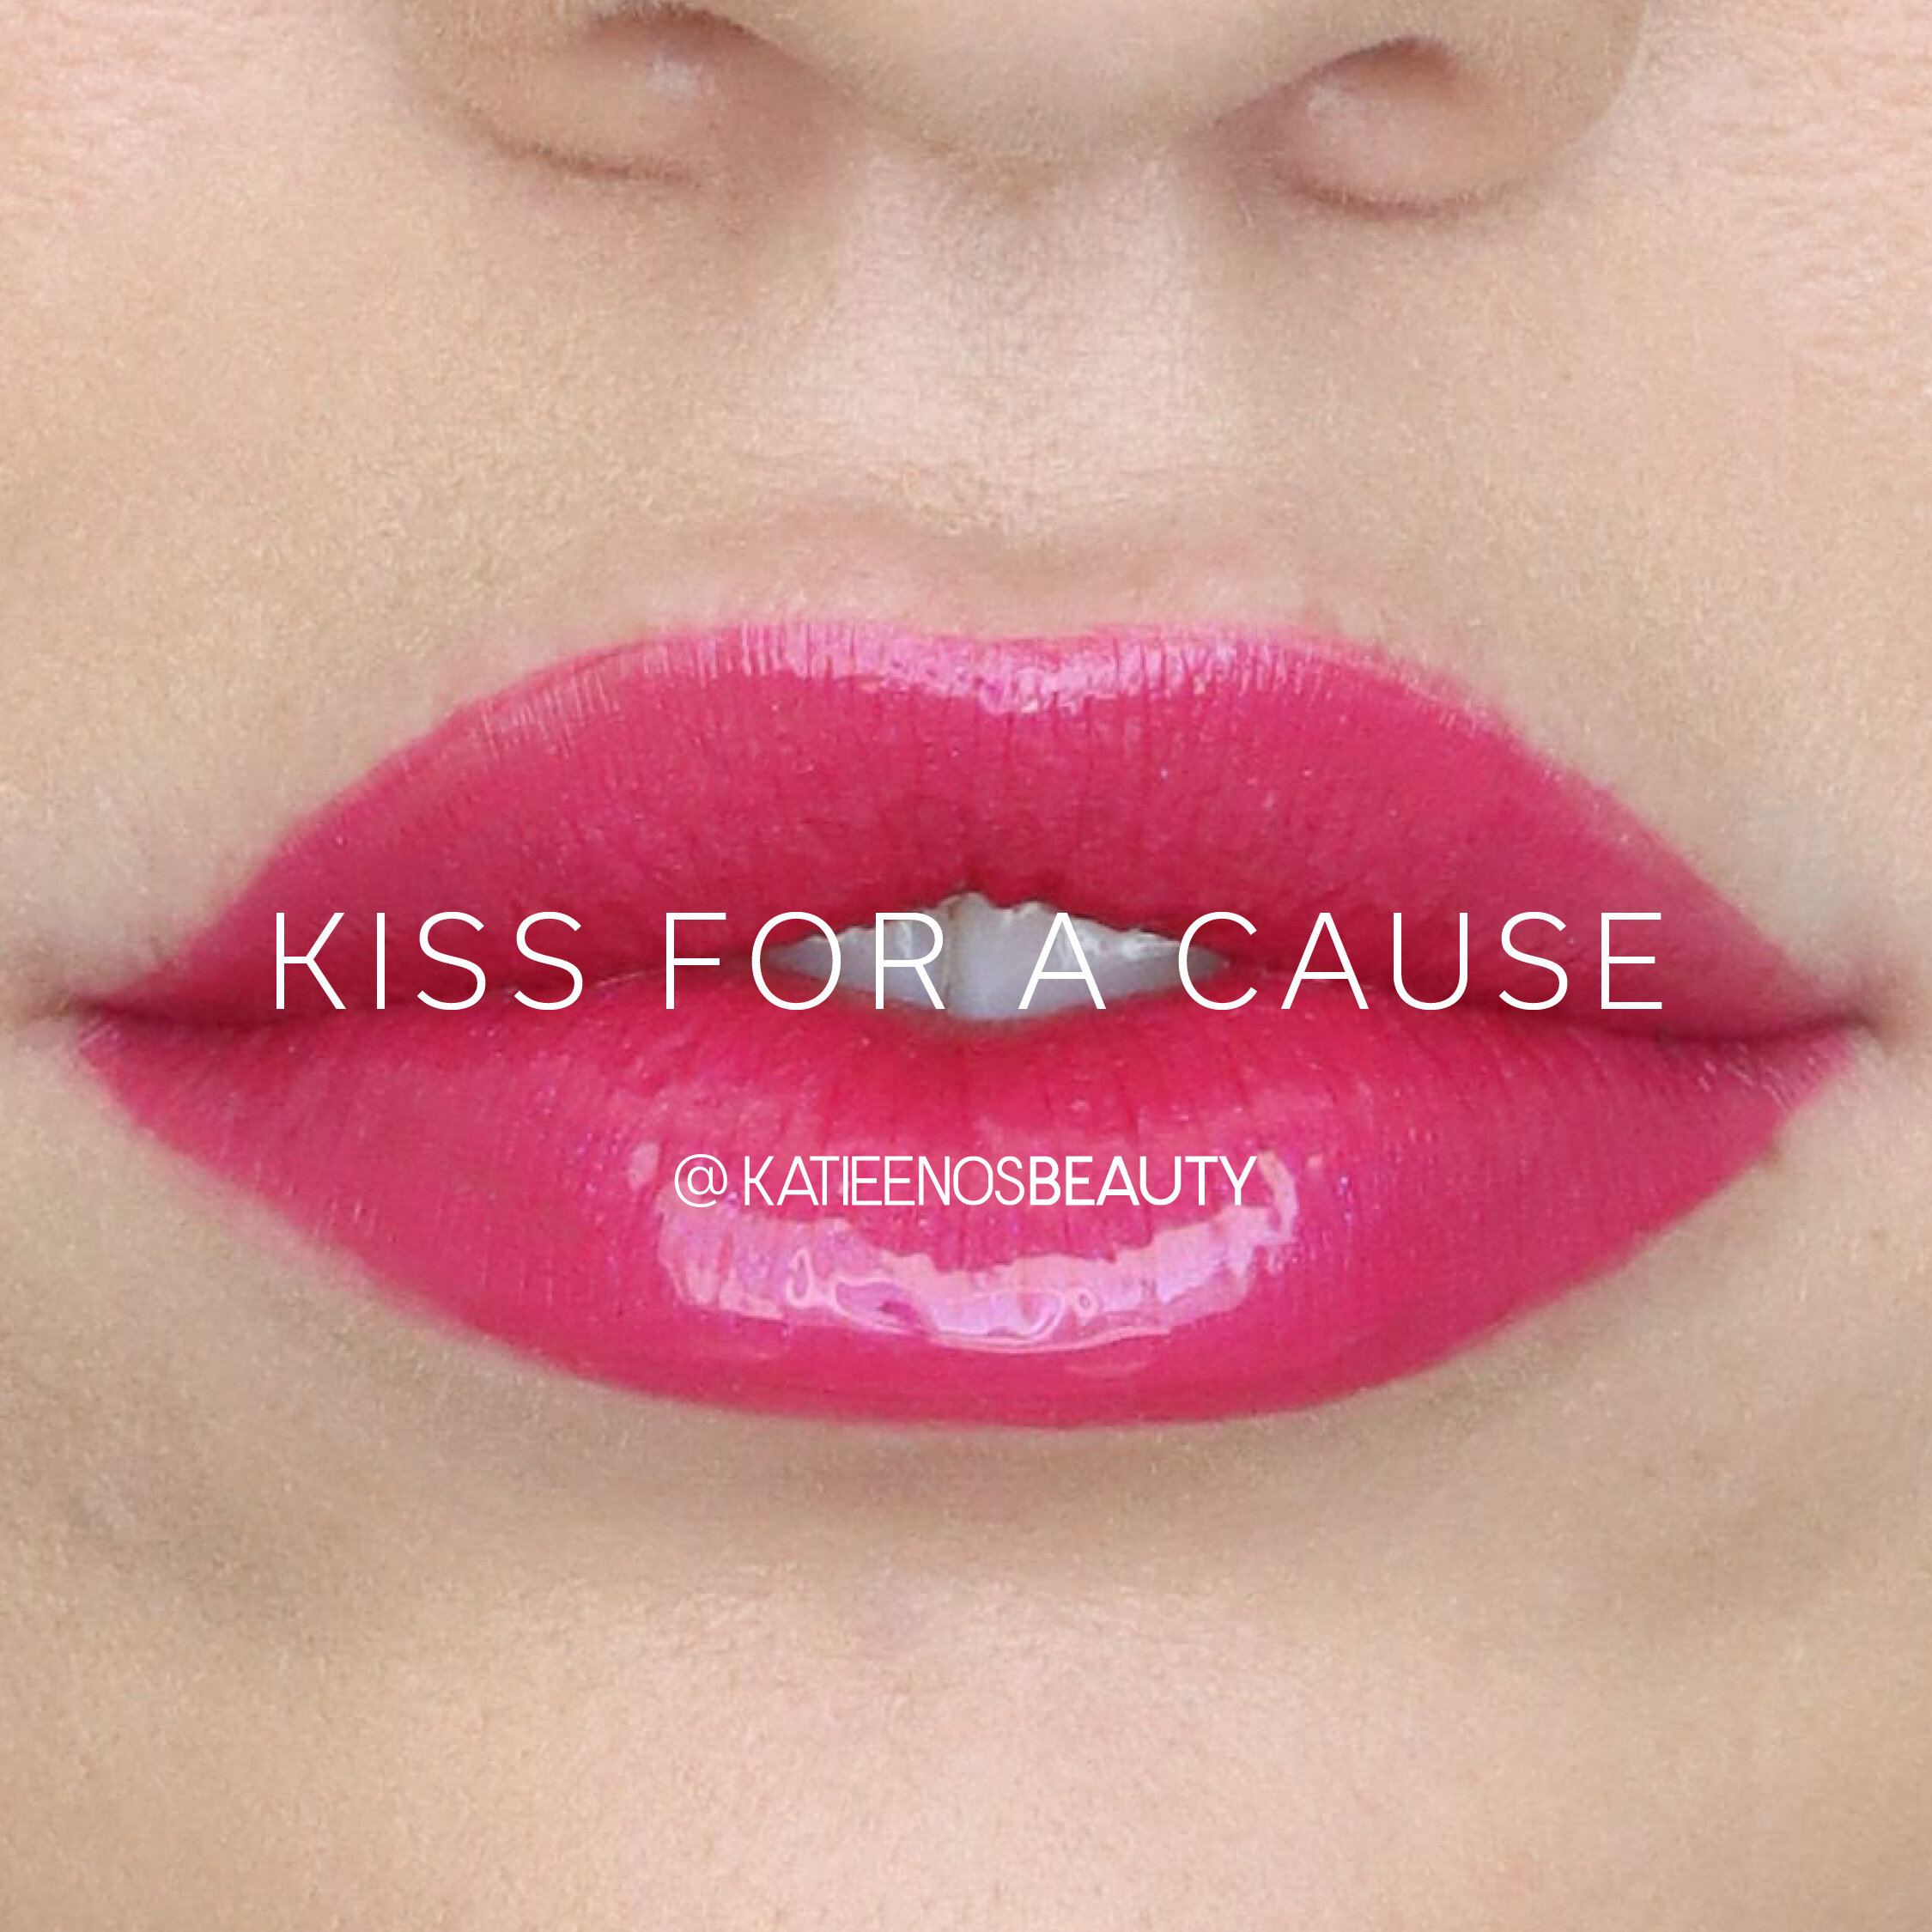 KISS FOR A CAUSE